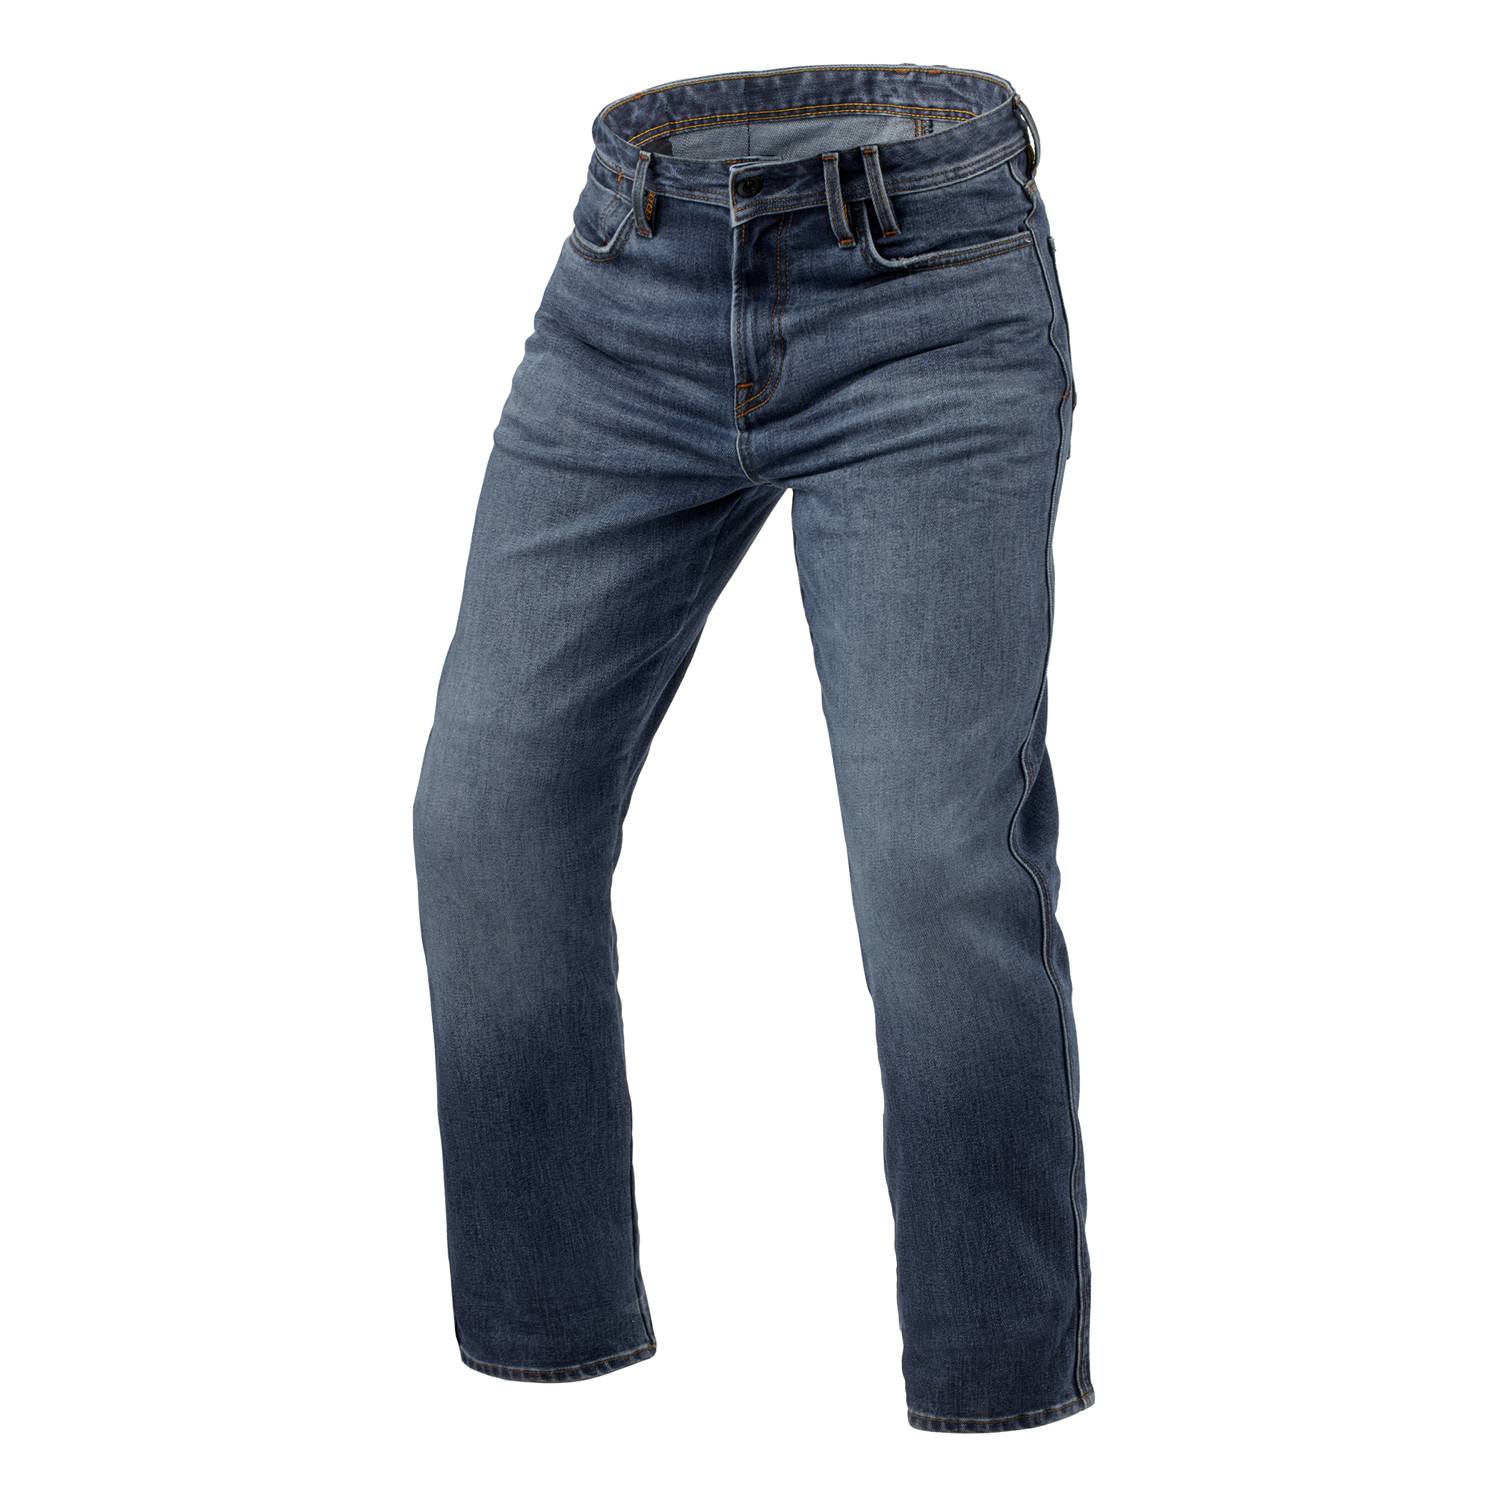 Image of EU REV'IT! Jeans Lombard 3 RF Medium Blue Stone L36 Motorcycle Jeans Taille L36/W31